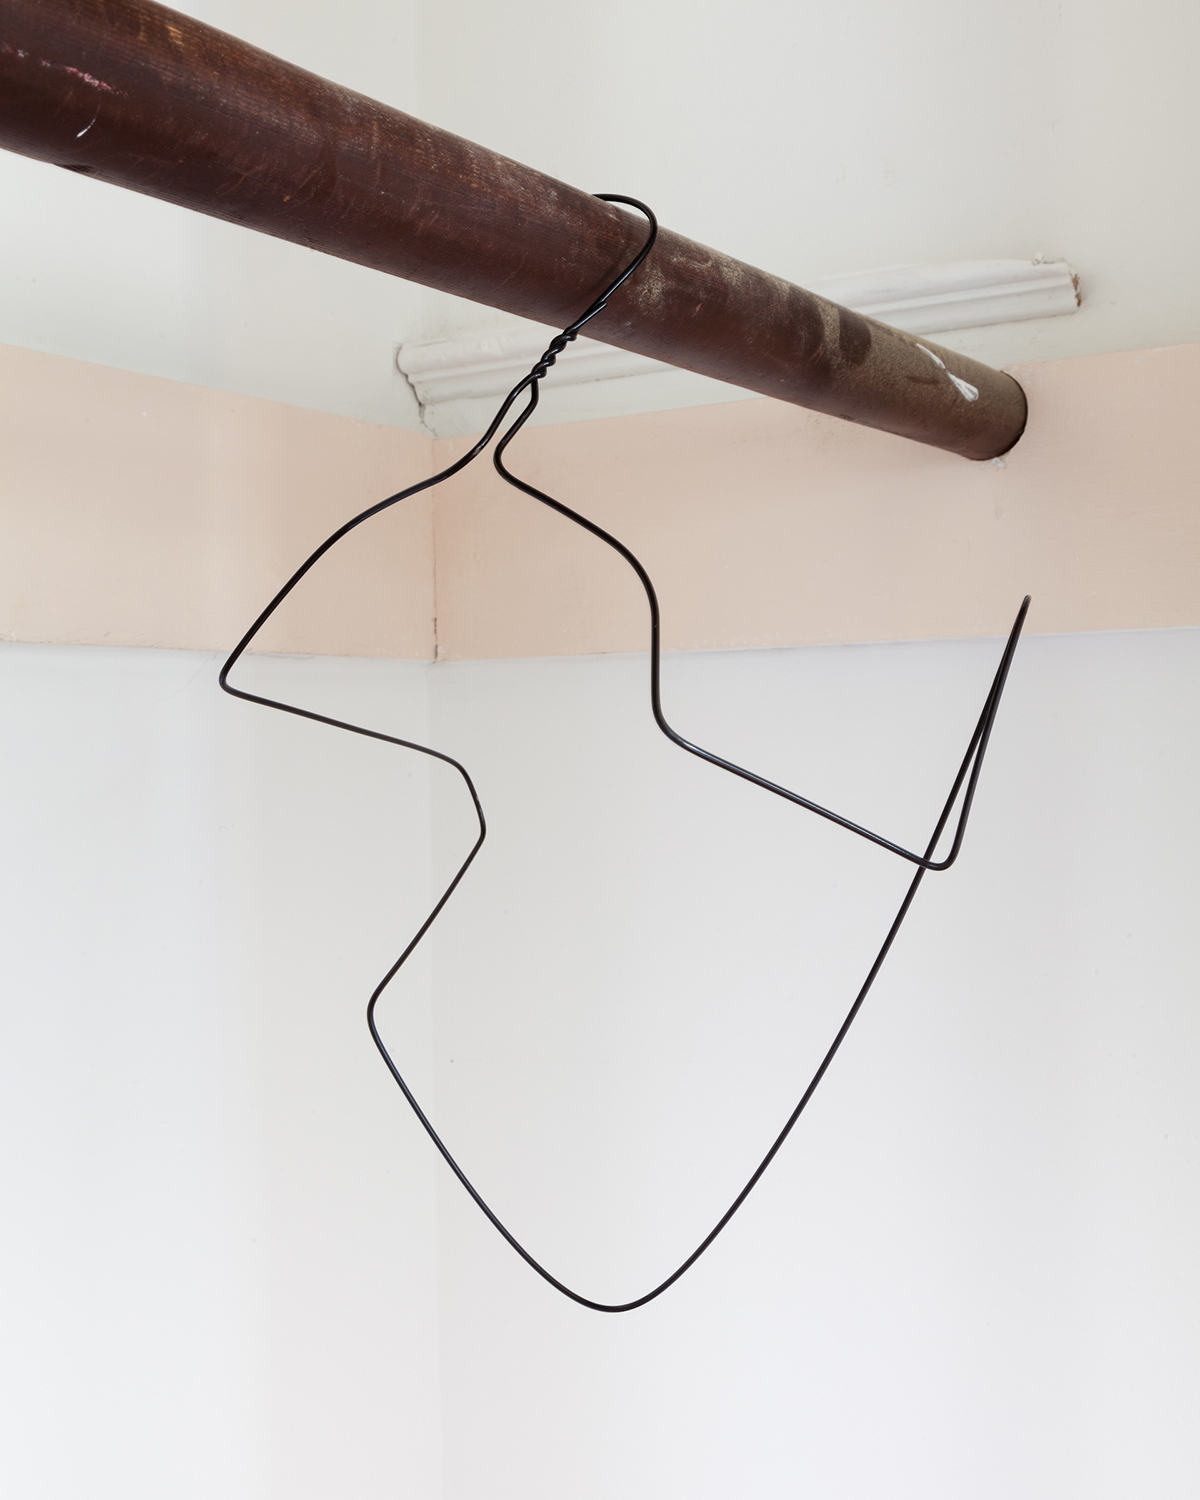  James Welling   Untitled   1975  Metal coat hanger  9 x 11 x 5 inches    